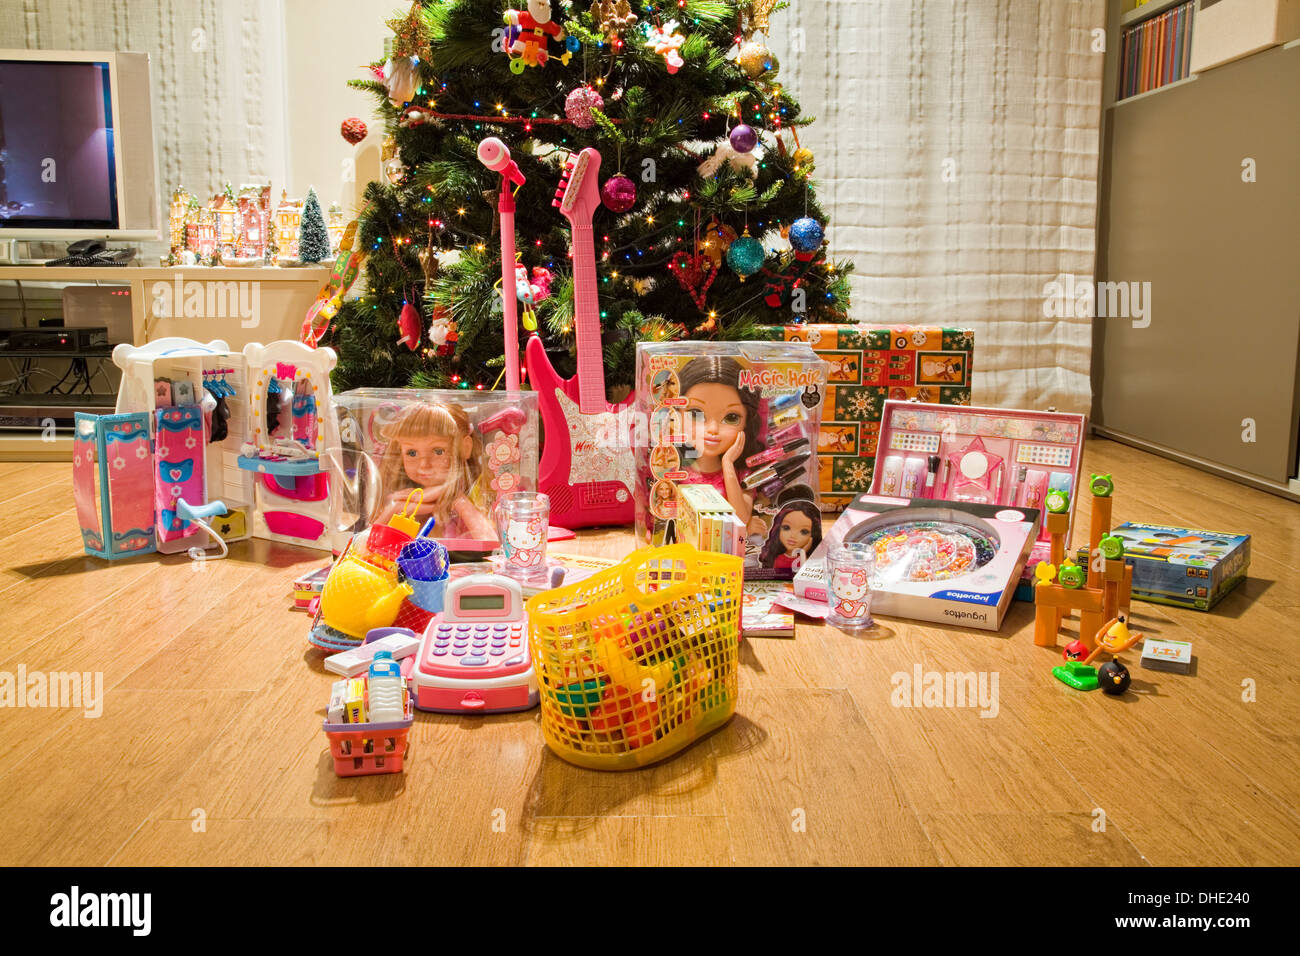 Christmas presents for a young girl Stock Photo